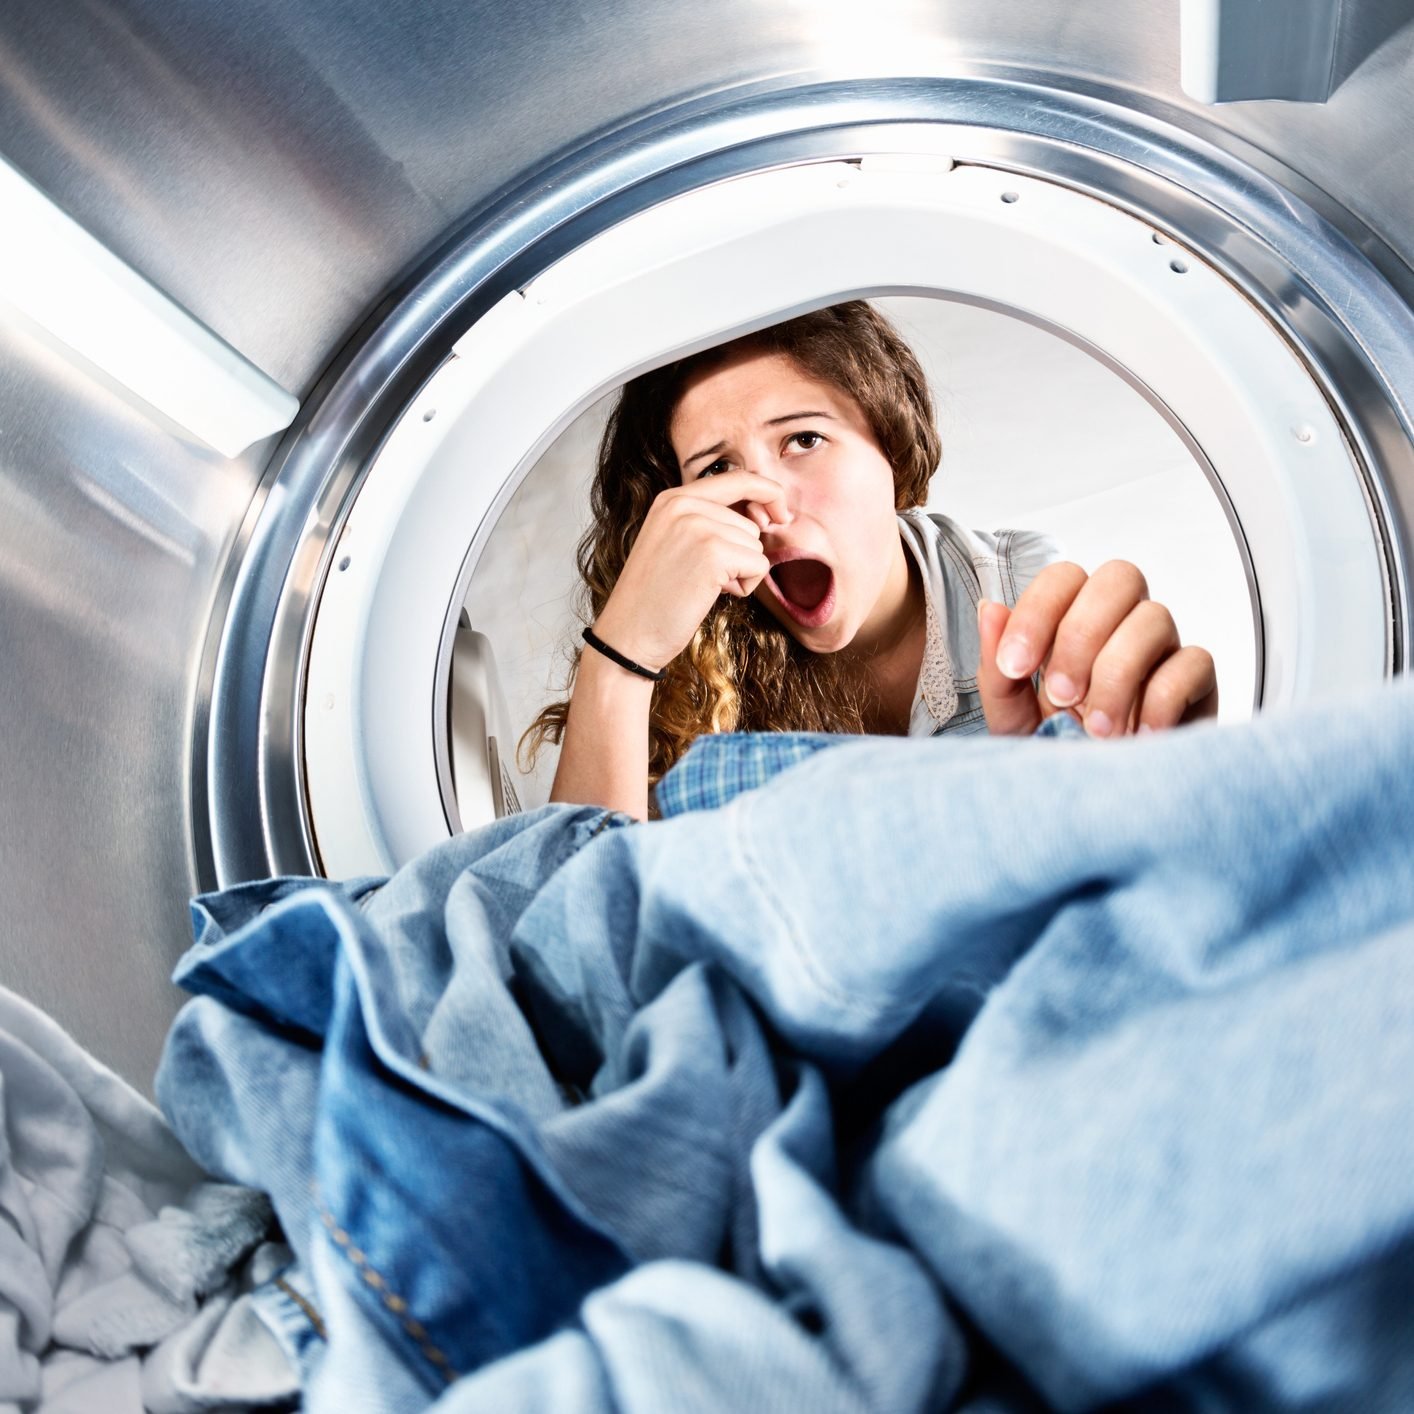 Dryer Repair, How to Repair a Clothes Dryer